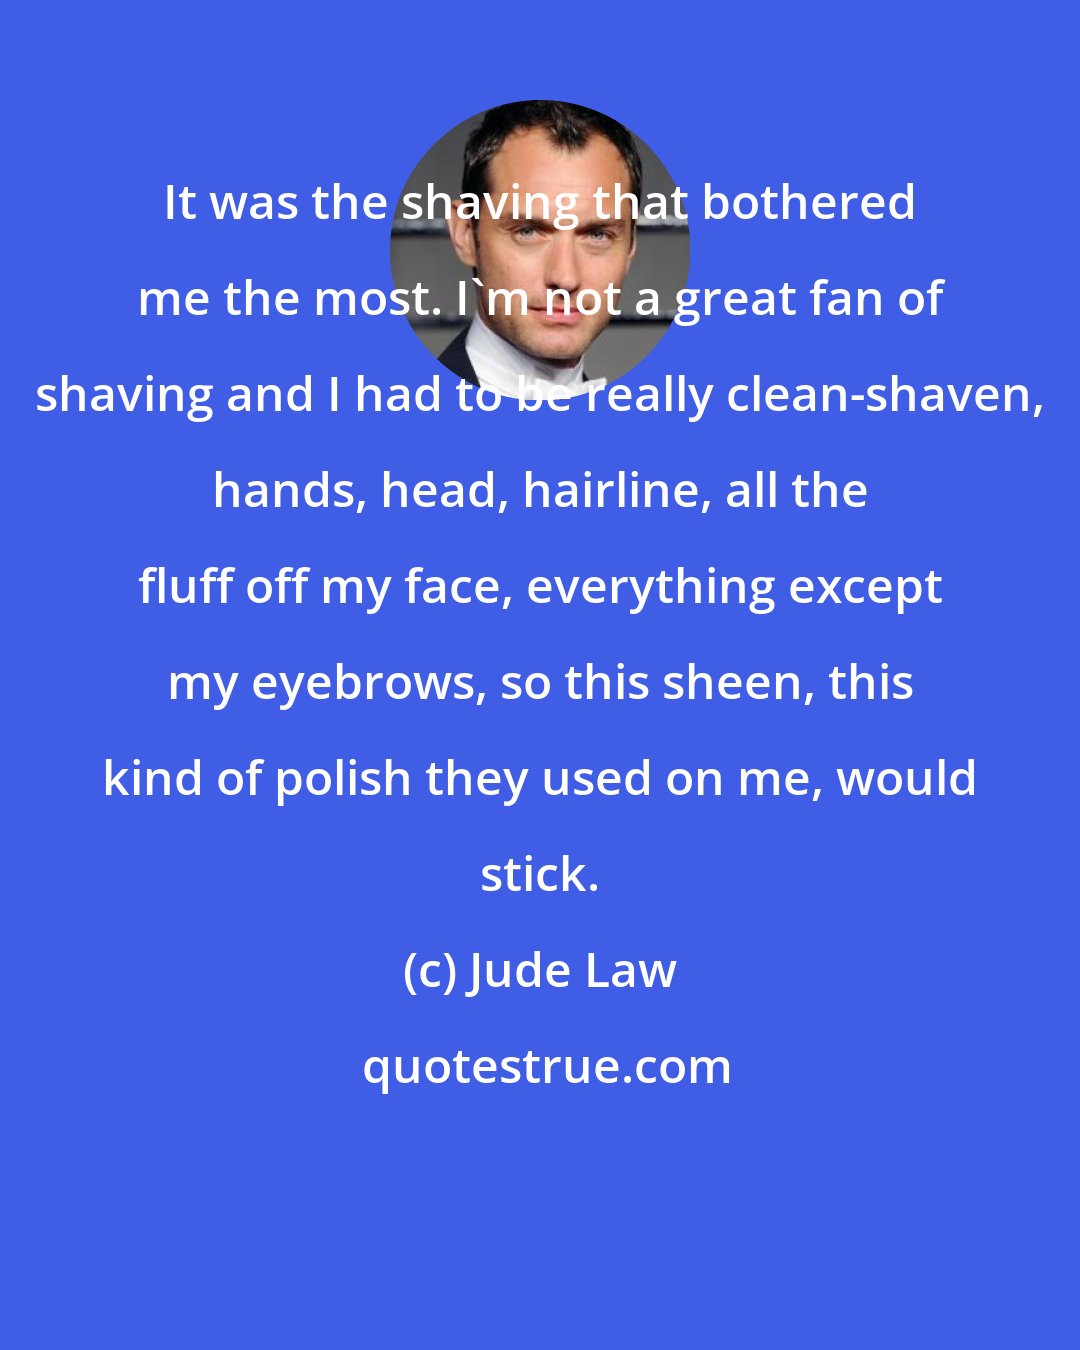 Jude Law: It was the shaving that bothered me the most. I'm not a great fan of shaving and I had to be really clean-shaven, hands, head, hairline, all the fluff off my face, everything except my eyebrows, so this sheen, this kind of polish they used on me, would stick.